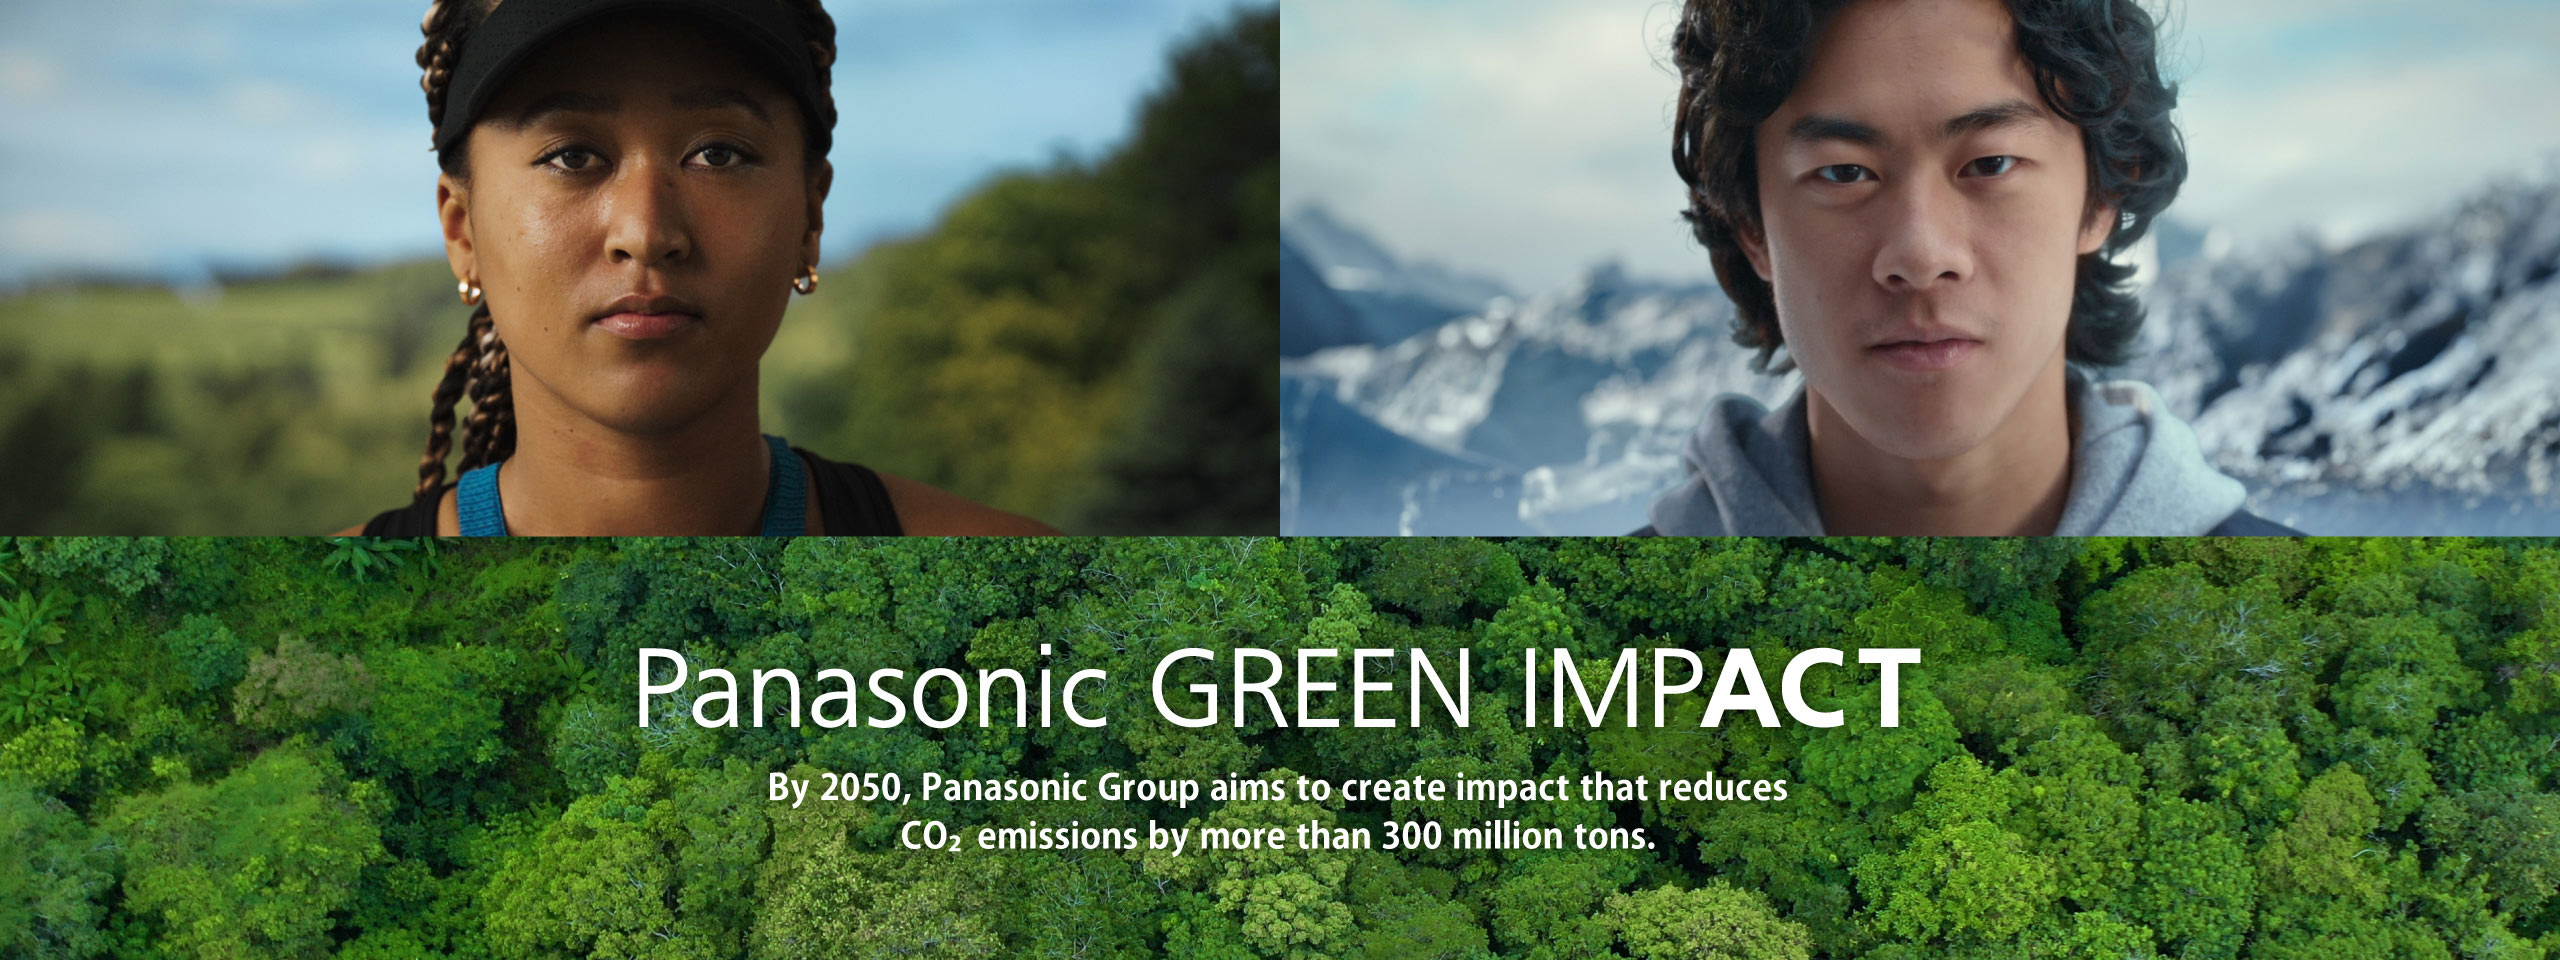 Panasonic GREEN IMPACT By 2050, Panasonic Group aims to create impact that reduces CO2 emissions by more than 300 million tons.